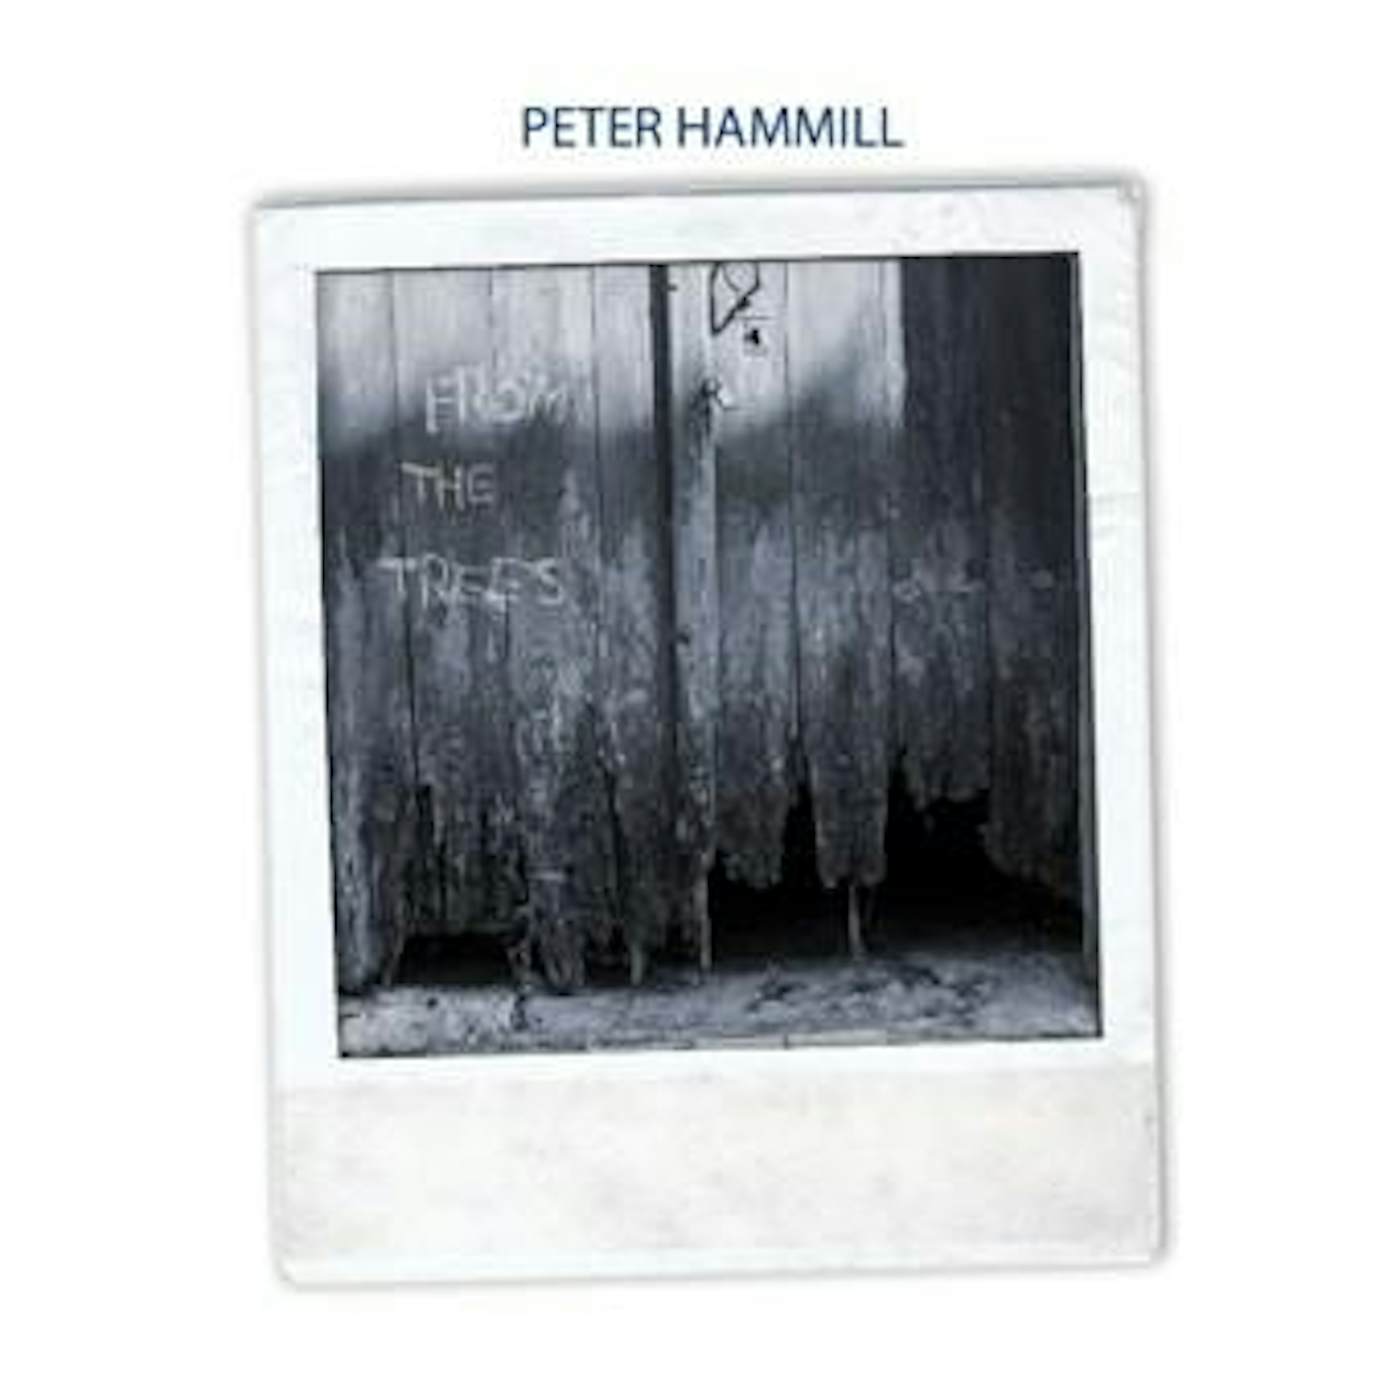 Peter Hammill 'From the Trees' Vinyl Record